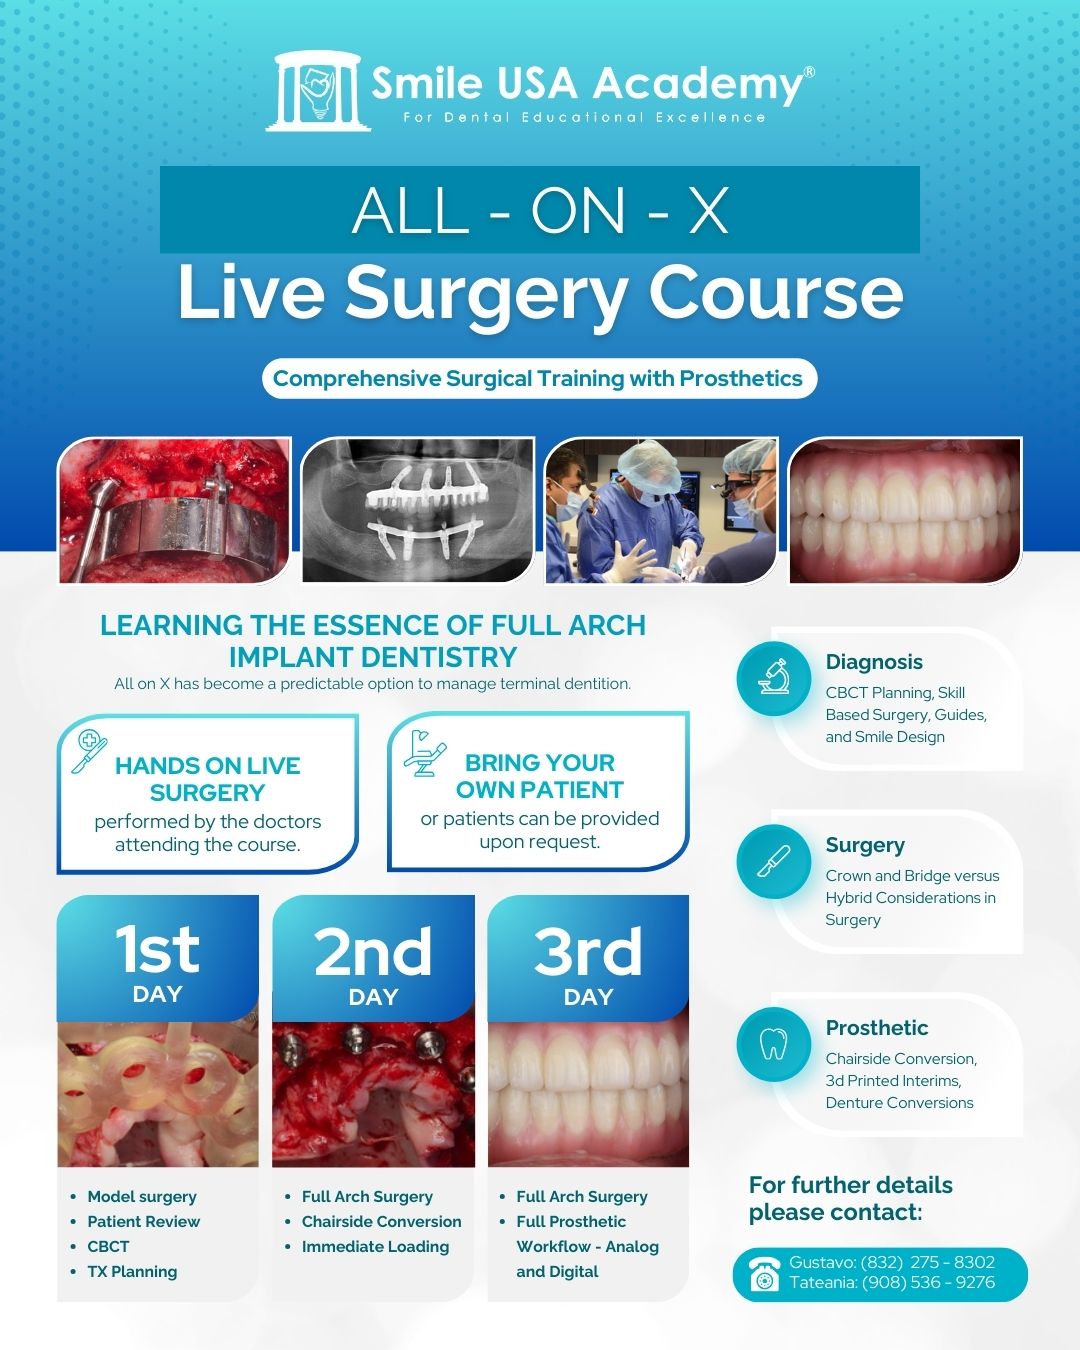 All On X Live Surgery Course: Comprehensive Surgical Training with Prosthetics - New Jersey - September